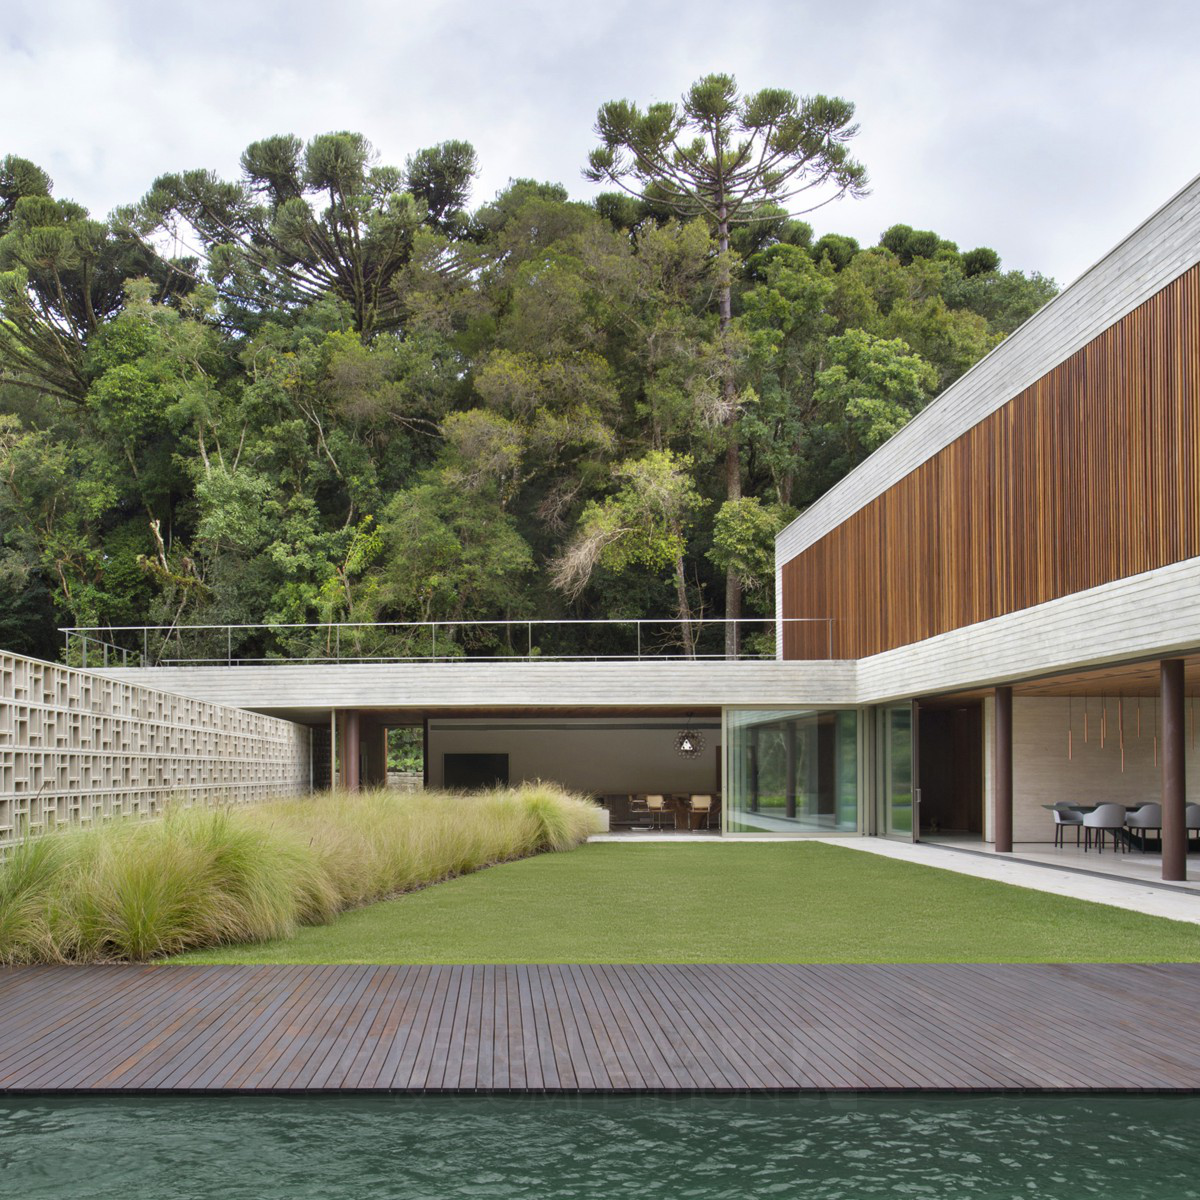 PA HOUSE HOUSE by Guilherme Torres